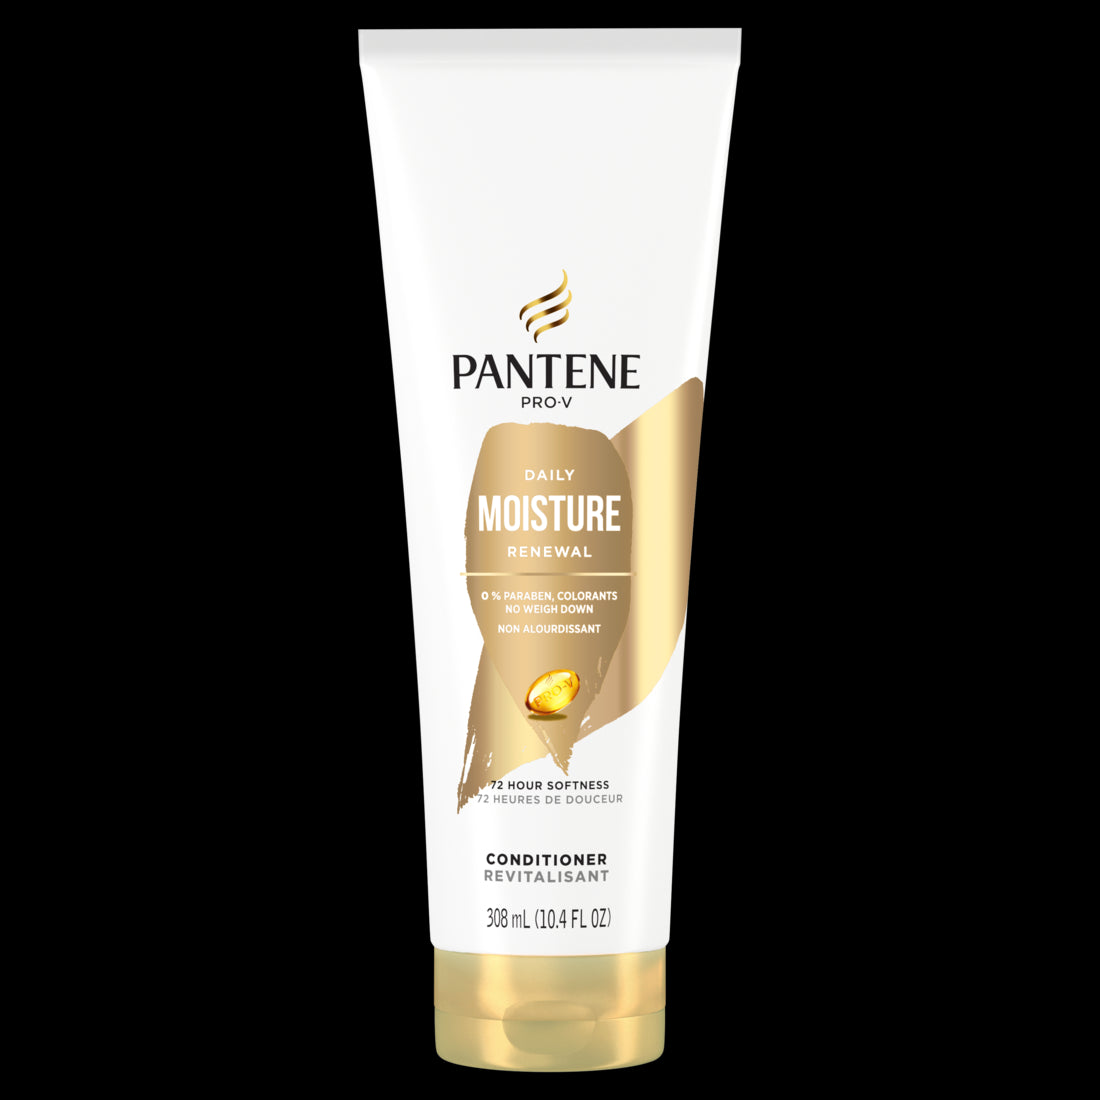 Pantene Conditioner Hydrates Dry damaged Hair Daily Moisture Renewal Safe for Color Treated Hair-10.4oz/12pk